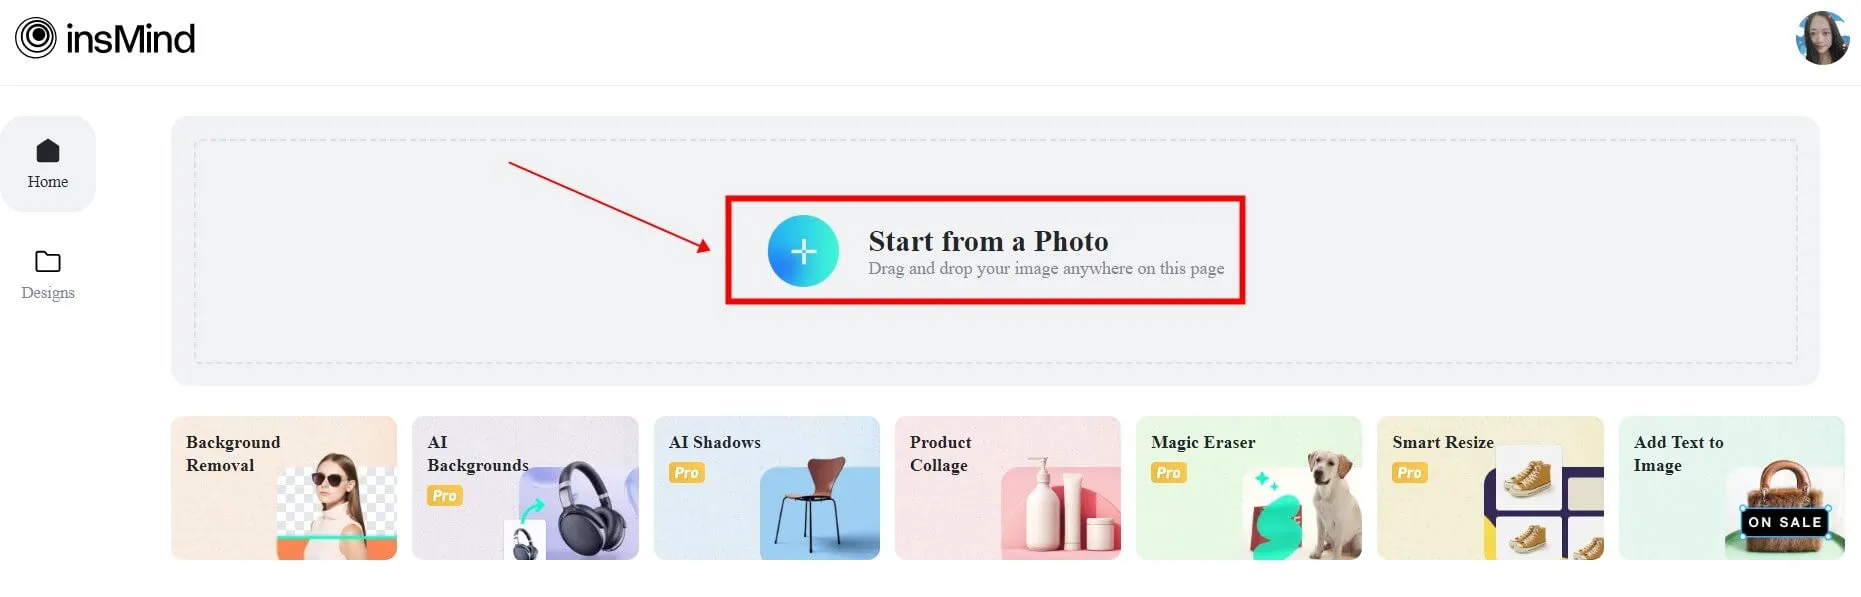 Click start from a photo button